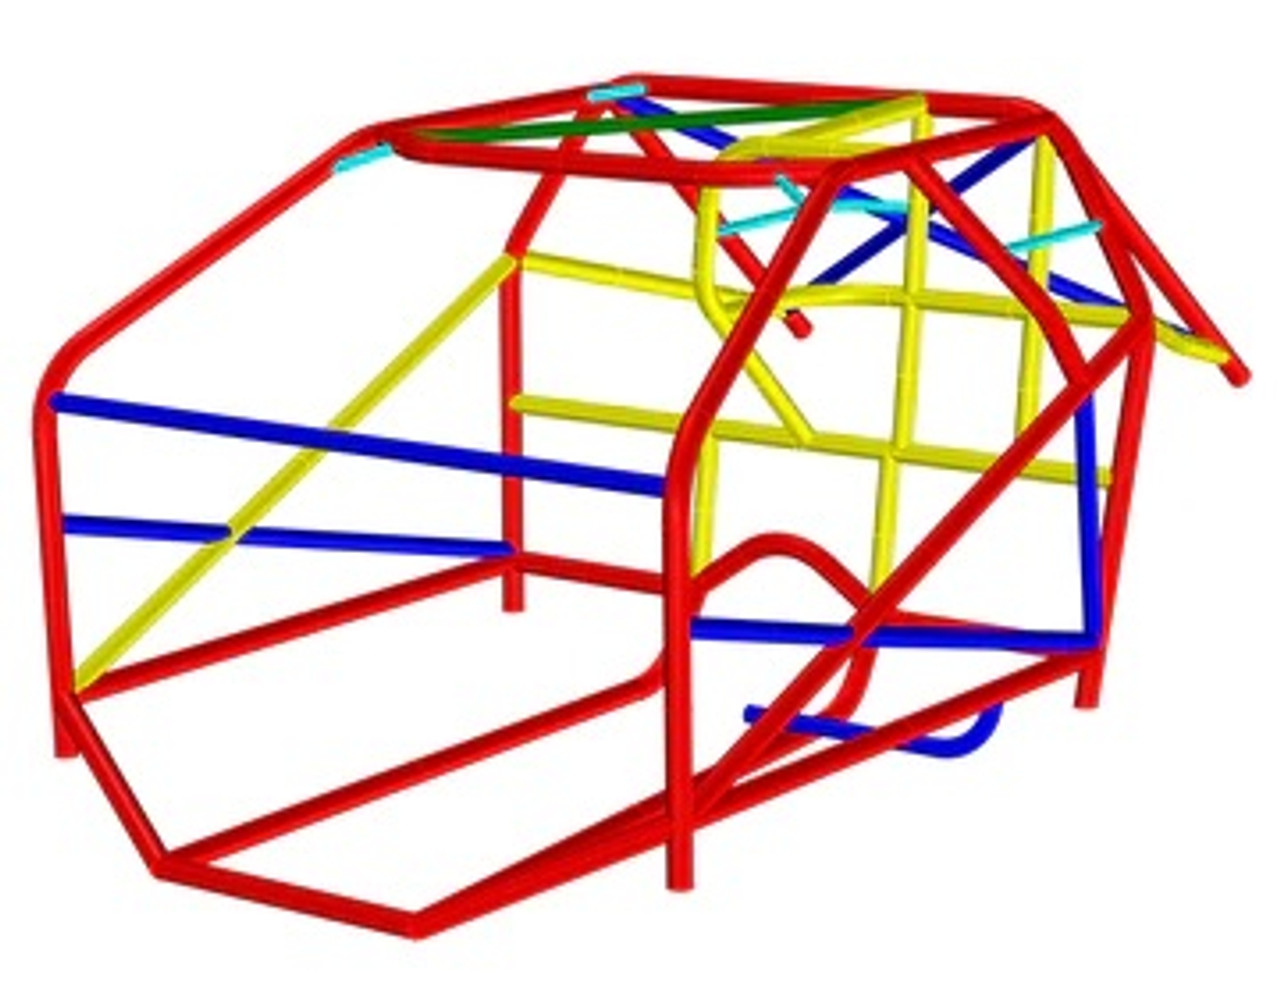 1993-2002 FBody Complete 25.5 Cert Roll Cage Kit (Hight and Tight Version)